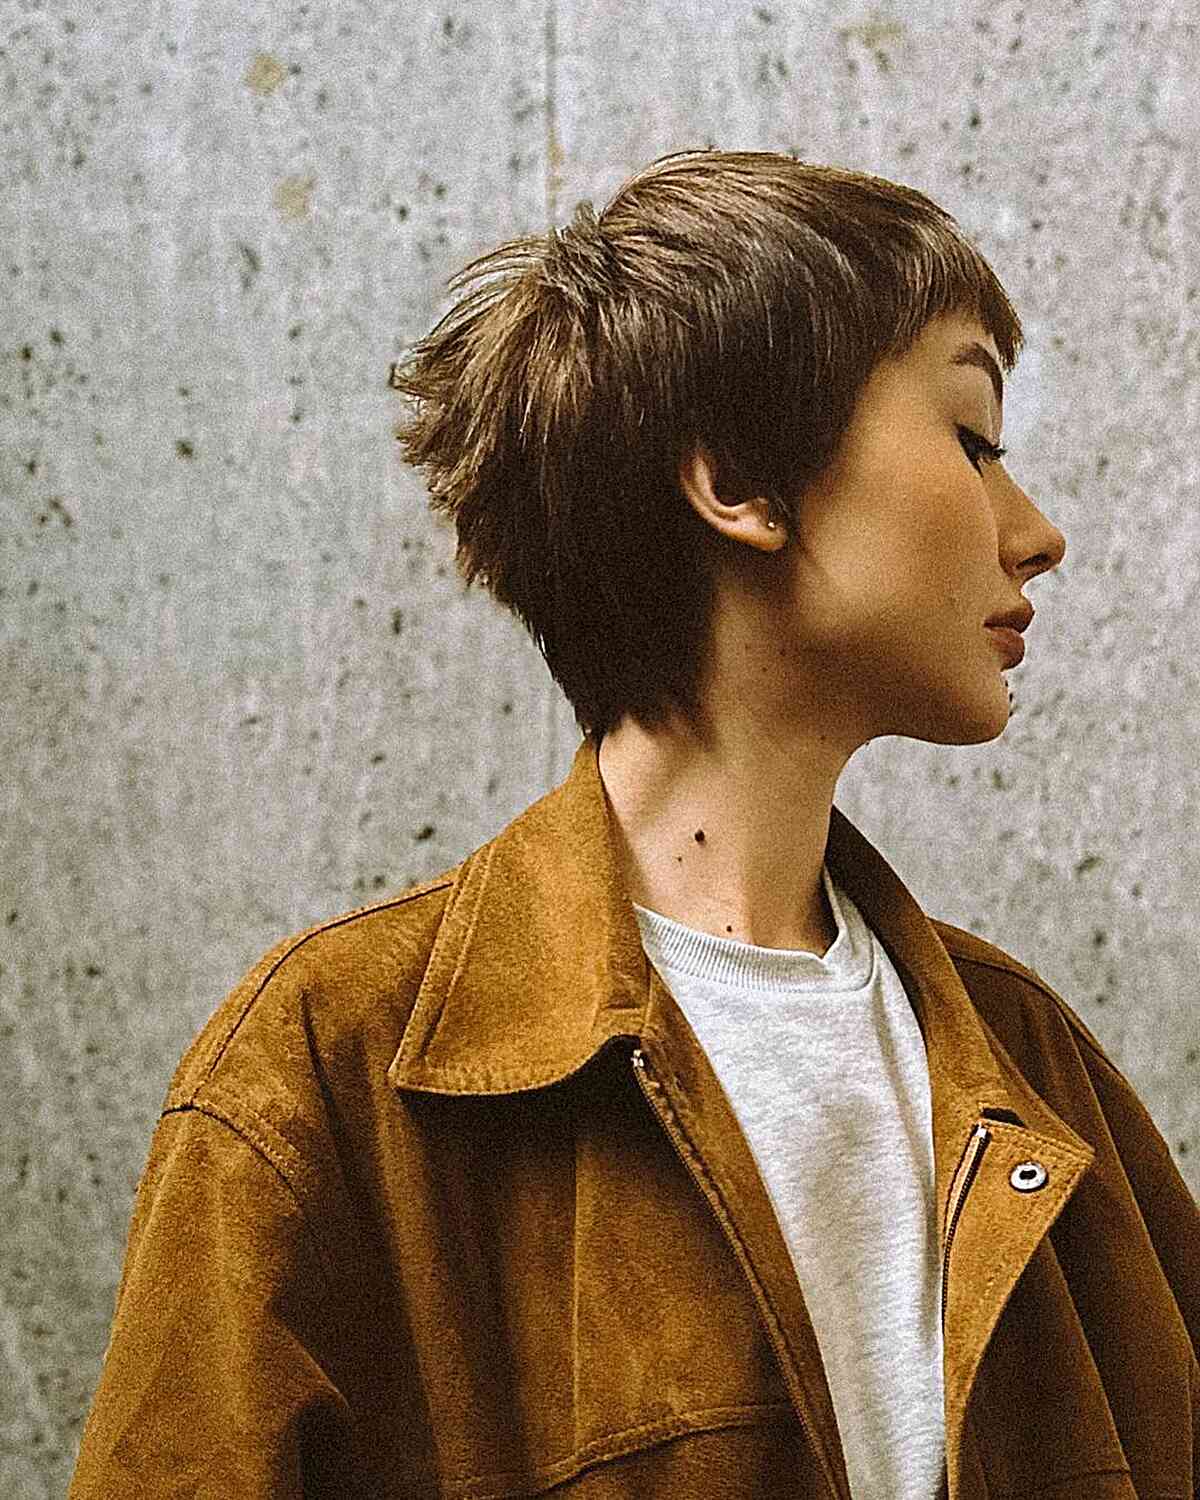 Short Pixie Crop with Textured Bangs on Dense Hair